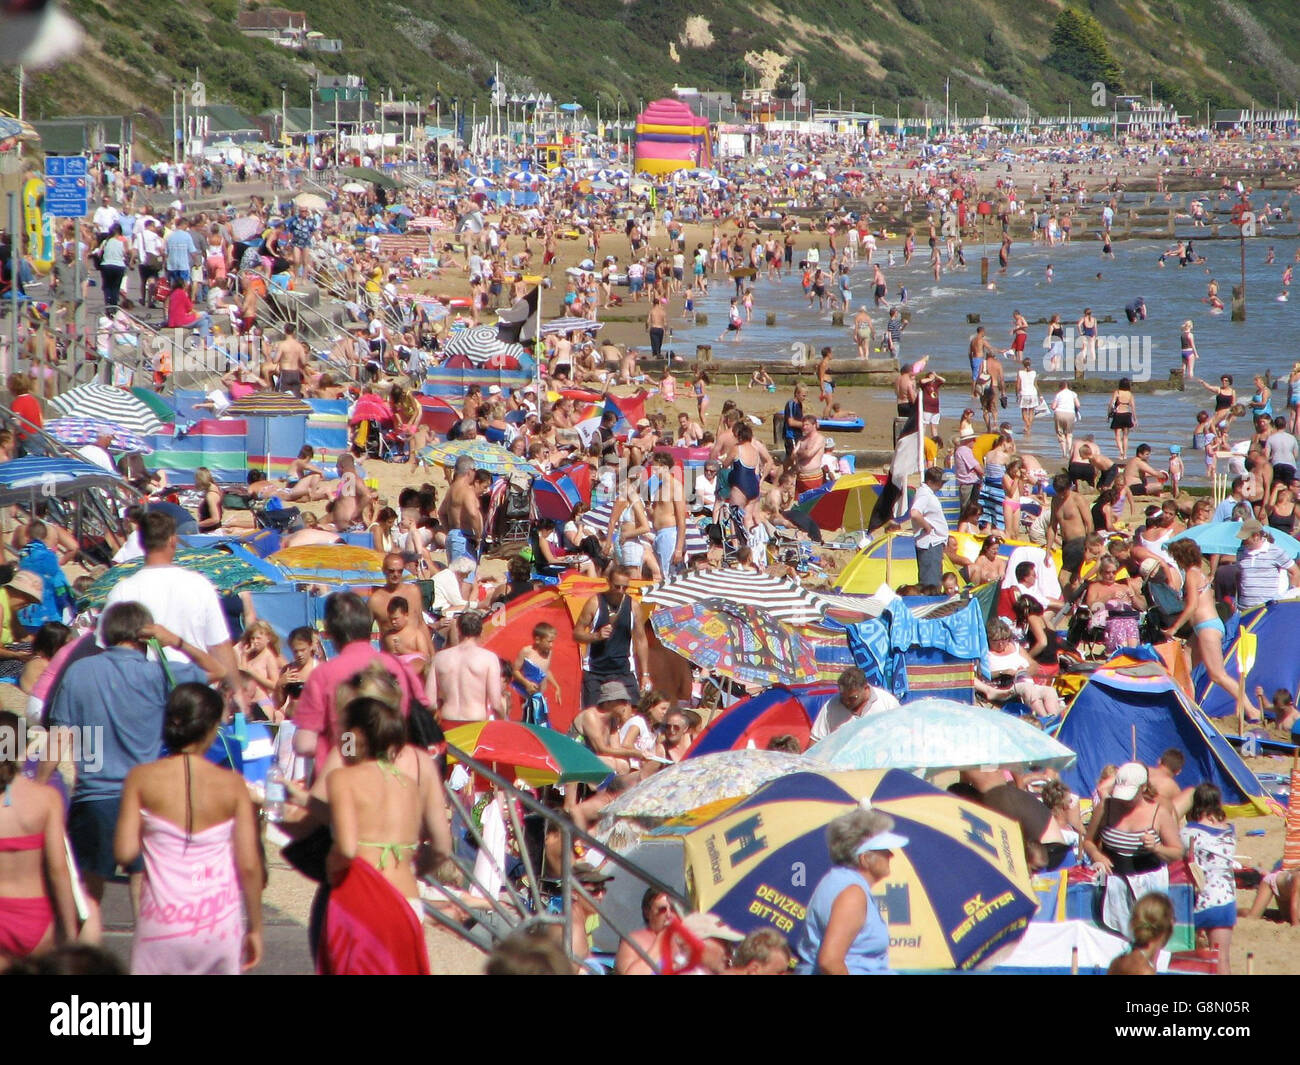 The scene on the beach at Branksome, Poole, in Dorsetas blue skies and sunshine brought thousands to the coast to the enjoy the Bank Holiday weekend. Stock Photo